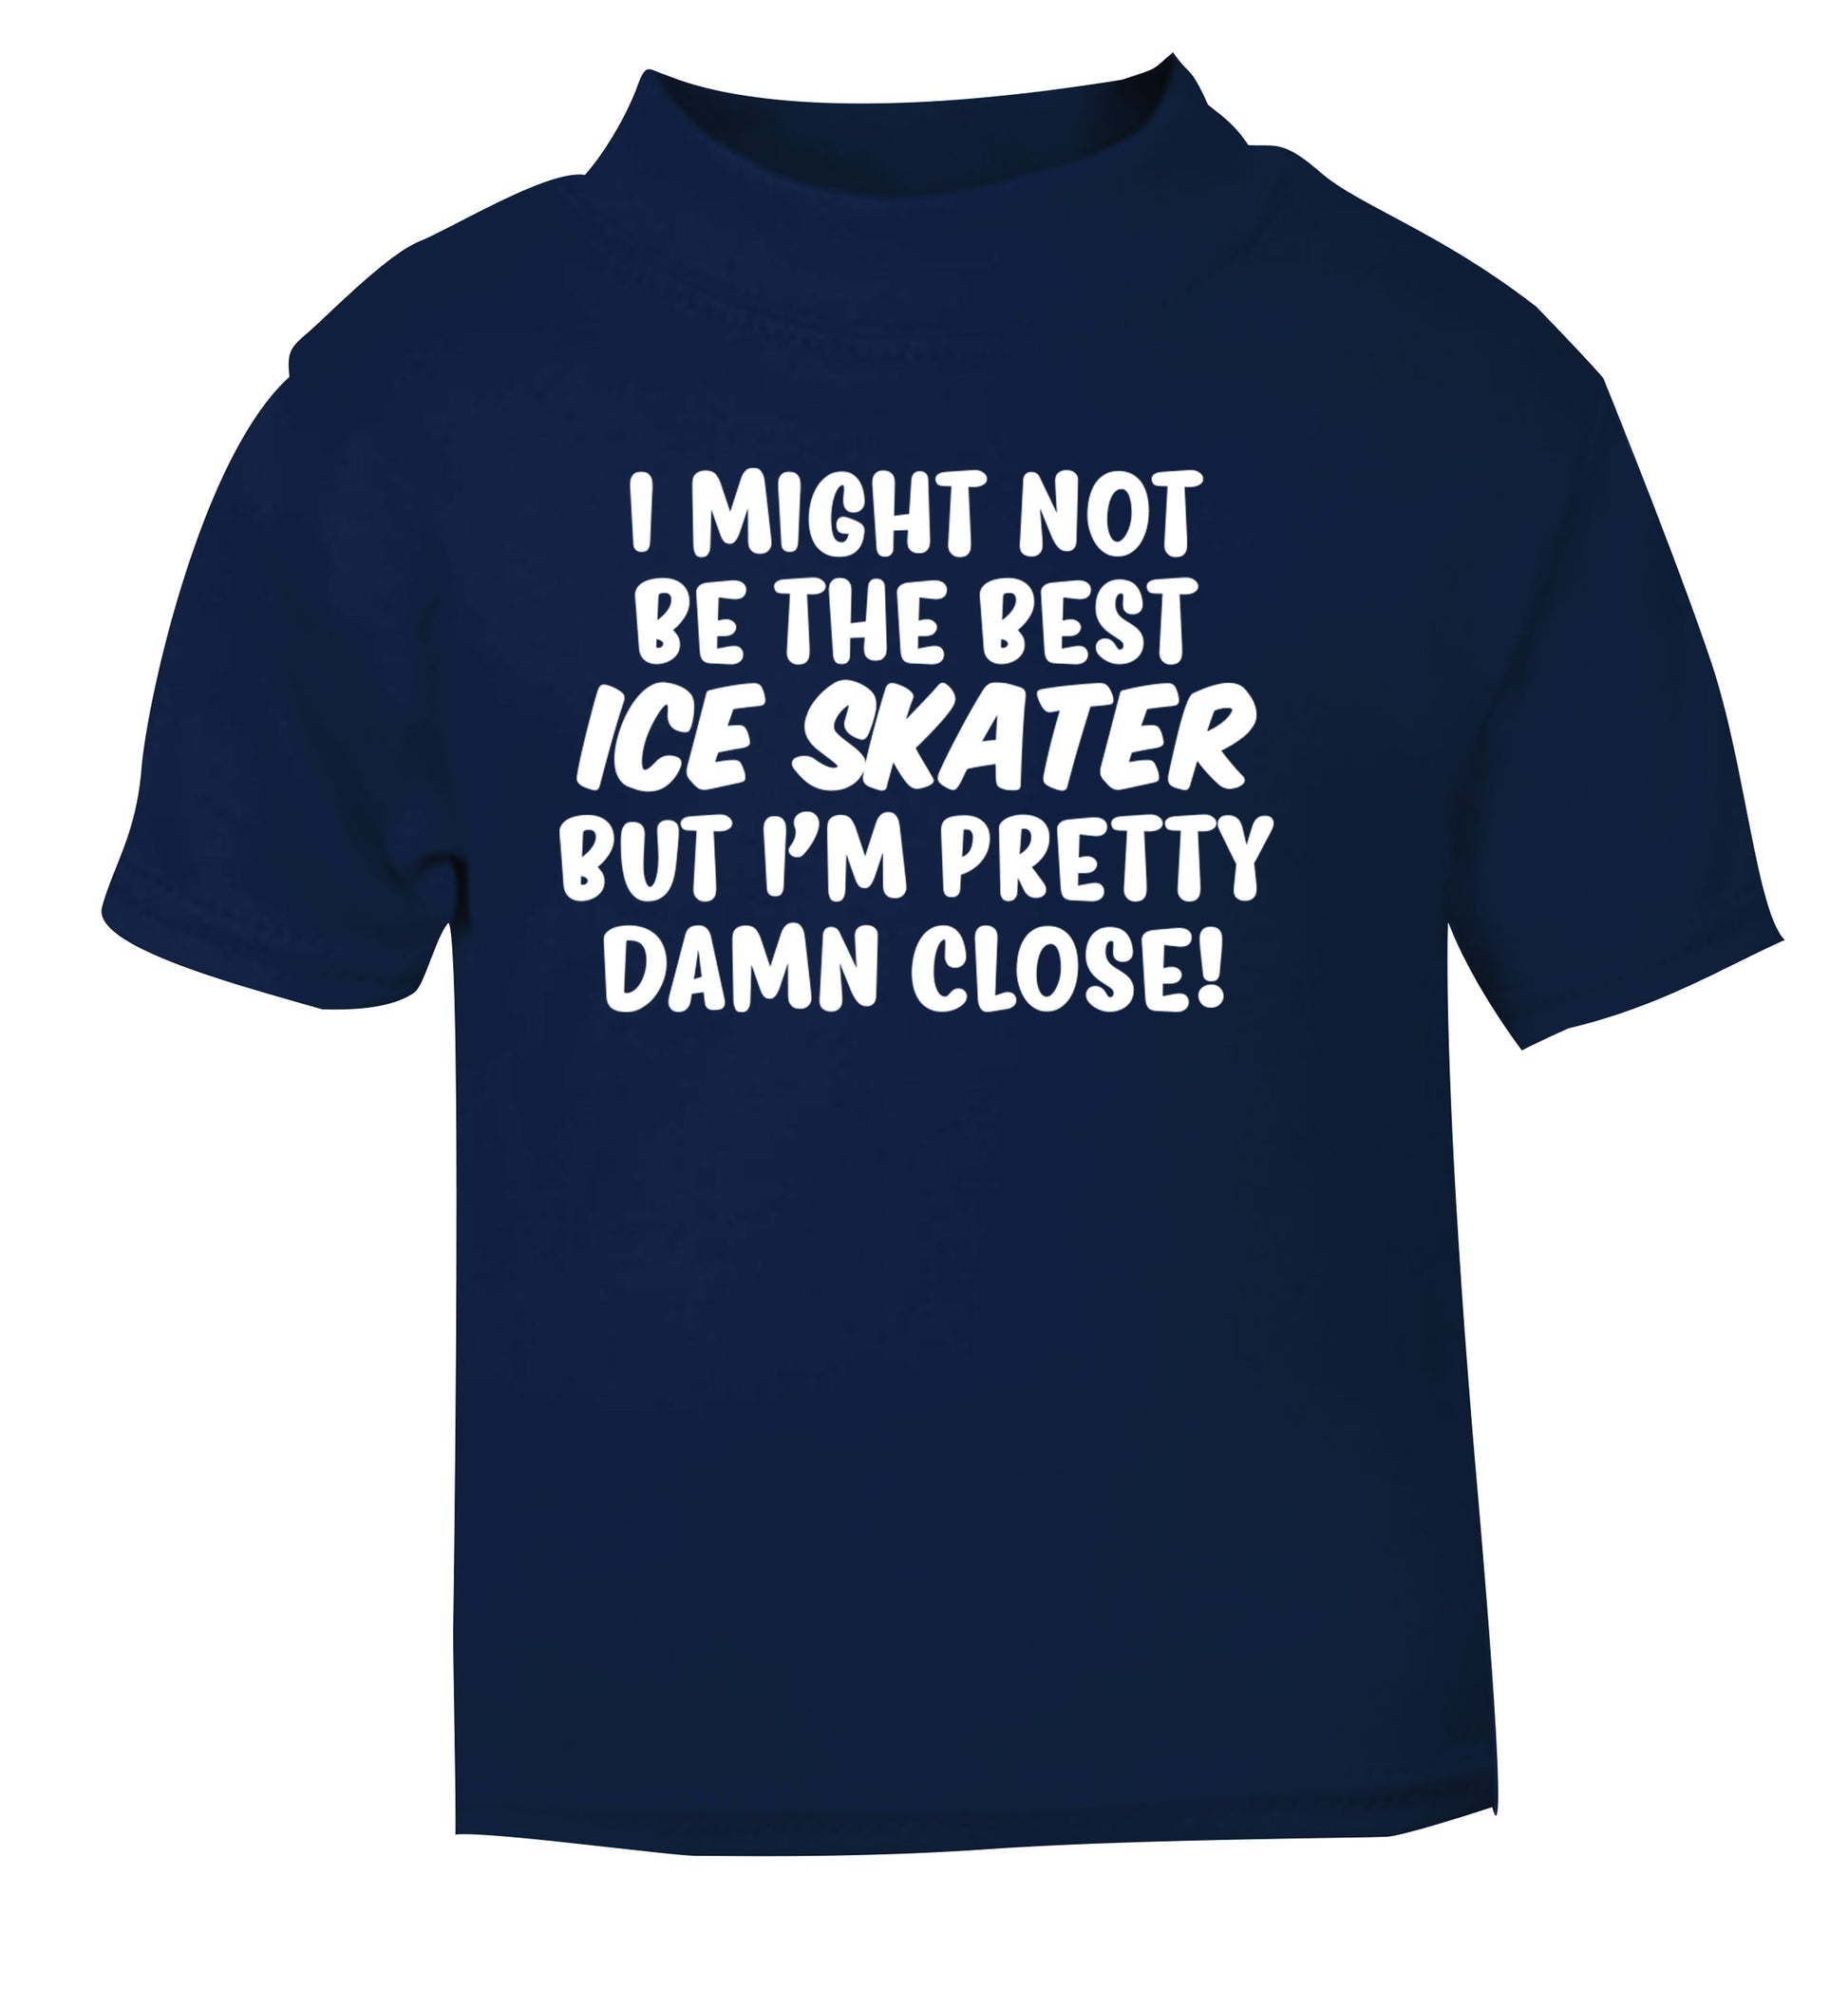 I might not be the best ice skater but I'm pretty damn close! navy Baby Toddler Tshirt 2 Years